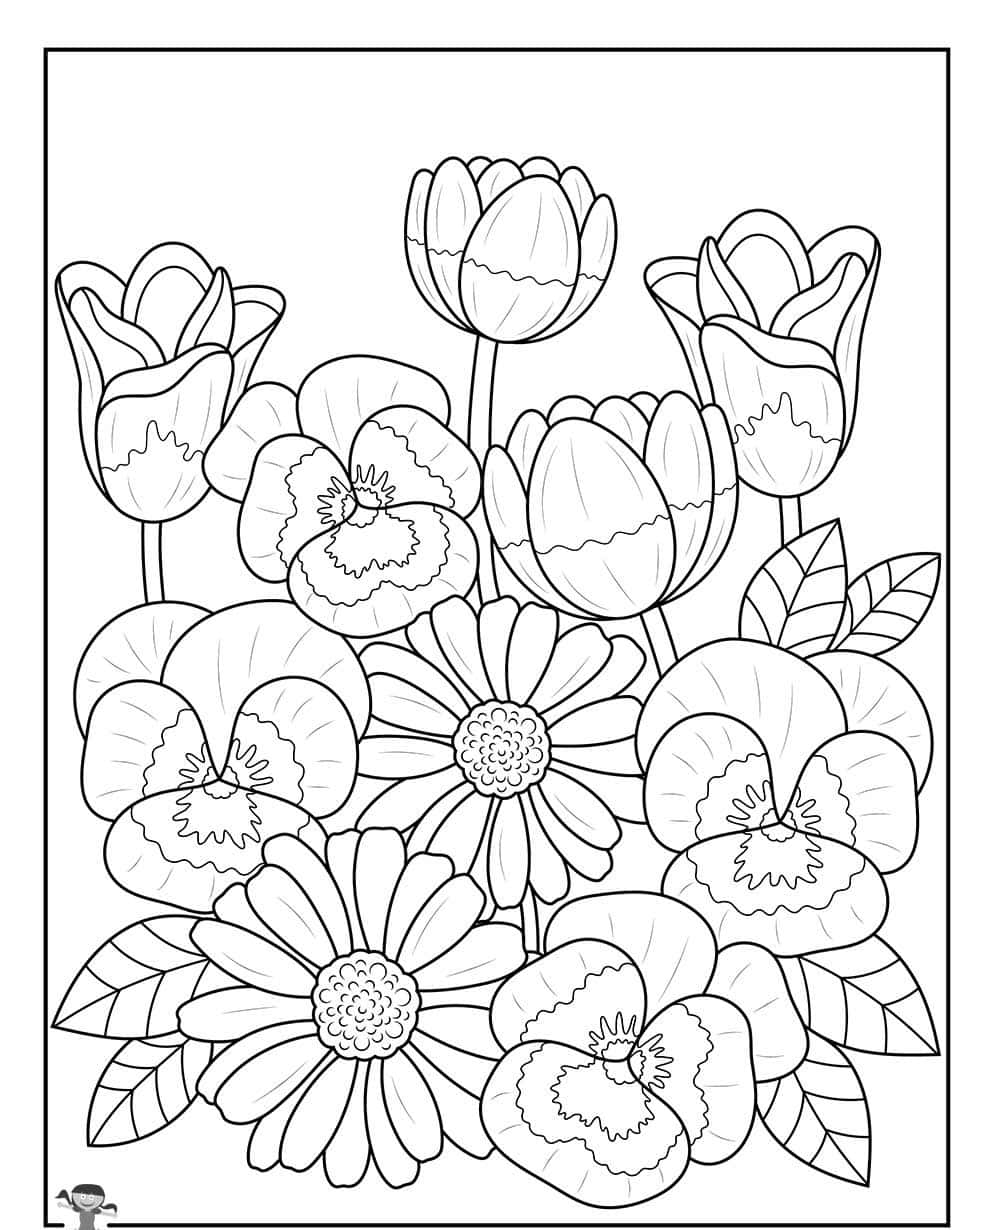 A Coloring Page With Flowers And Pansies